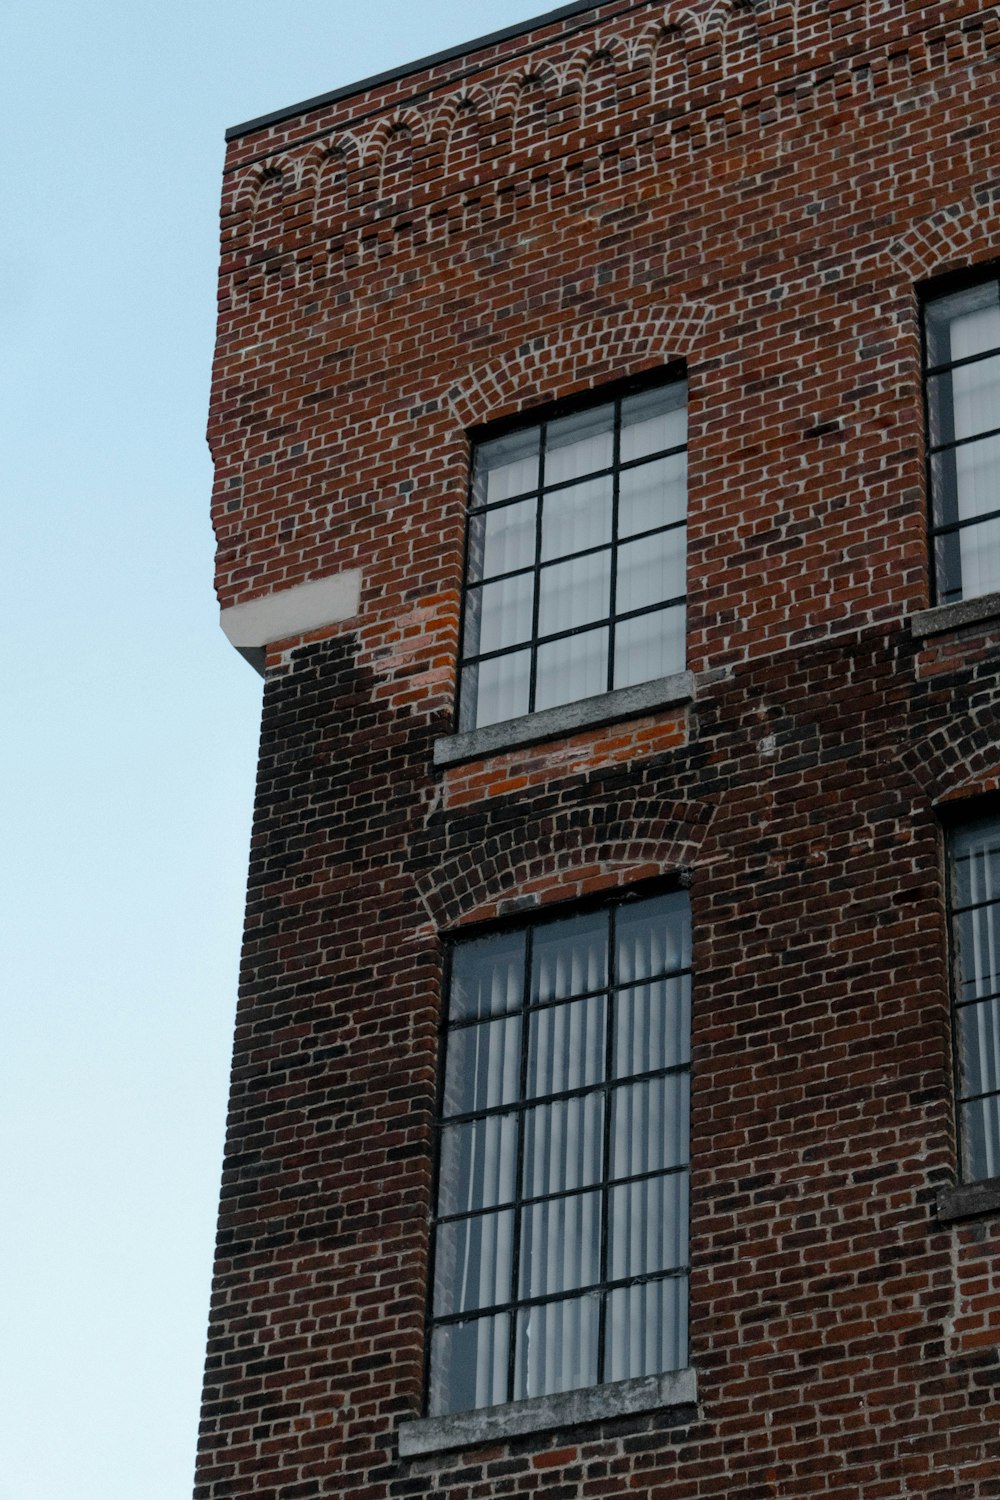 a brick building with three windows and a clock